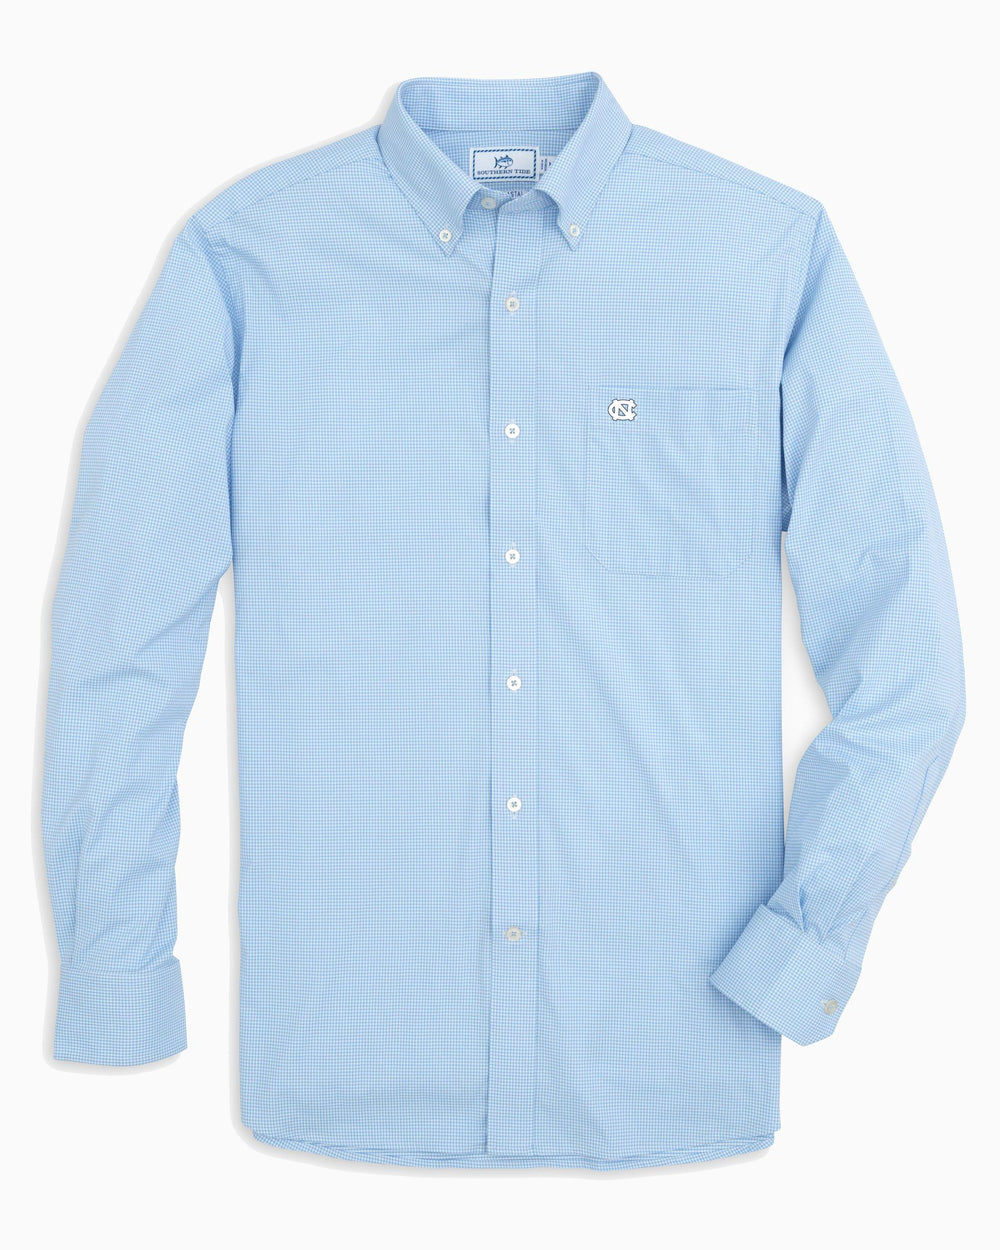 The front view of the Men's Light Blue UNC Tar Heels Gingham Button Down Shirt by Southern Tide - Tide Blue